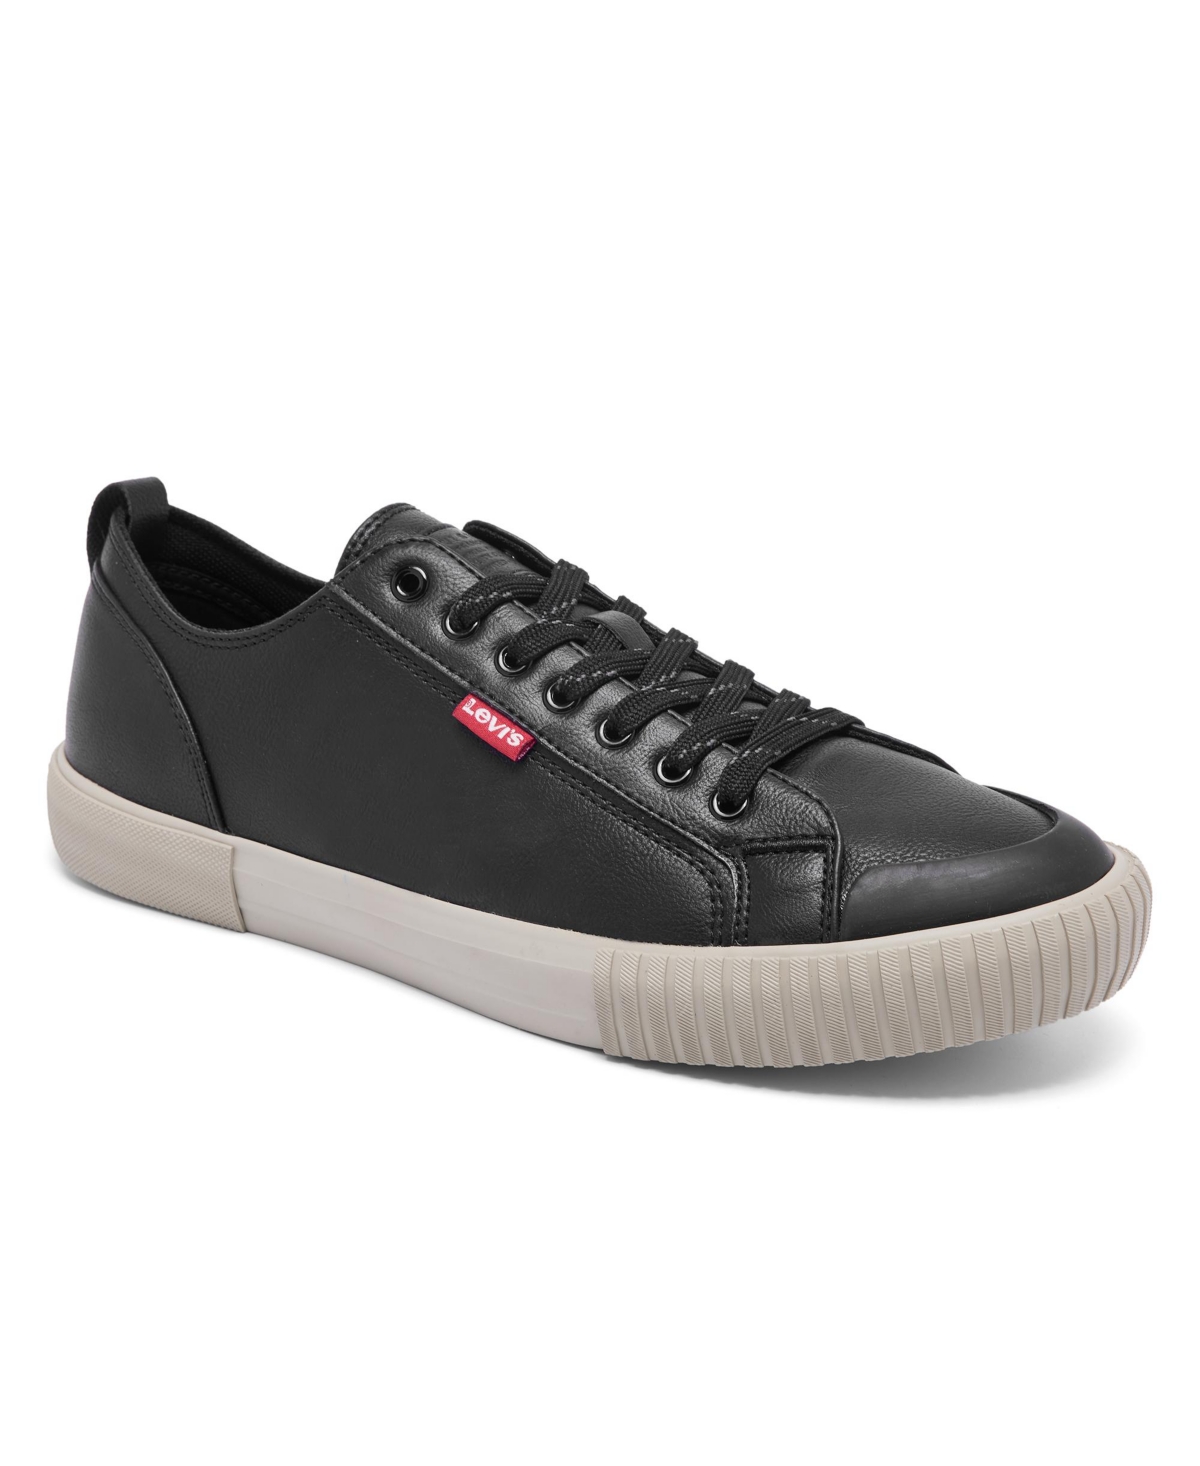 Men's Anikin Nl Lace-Up Sneakers - Black Putty